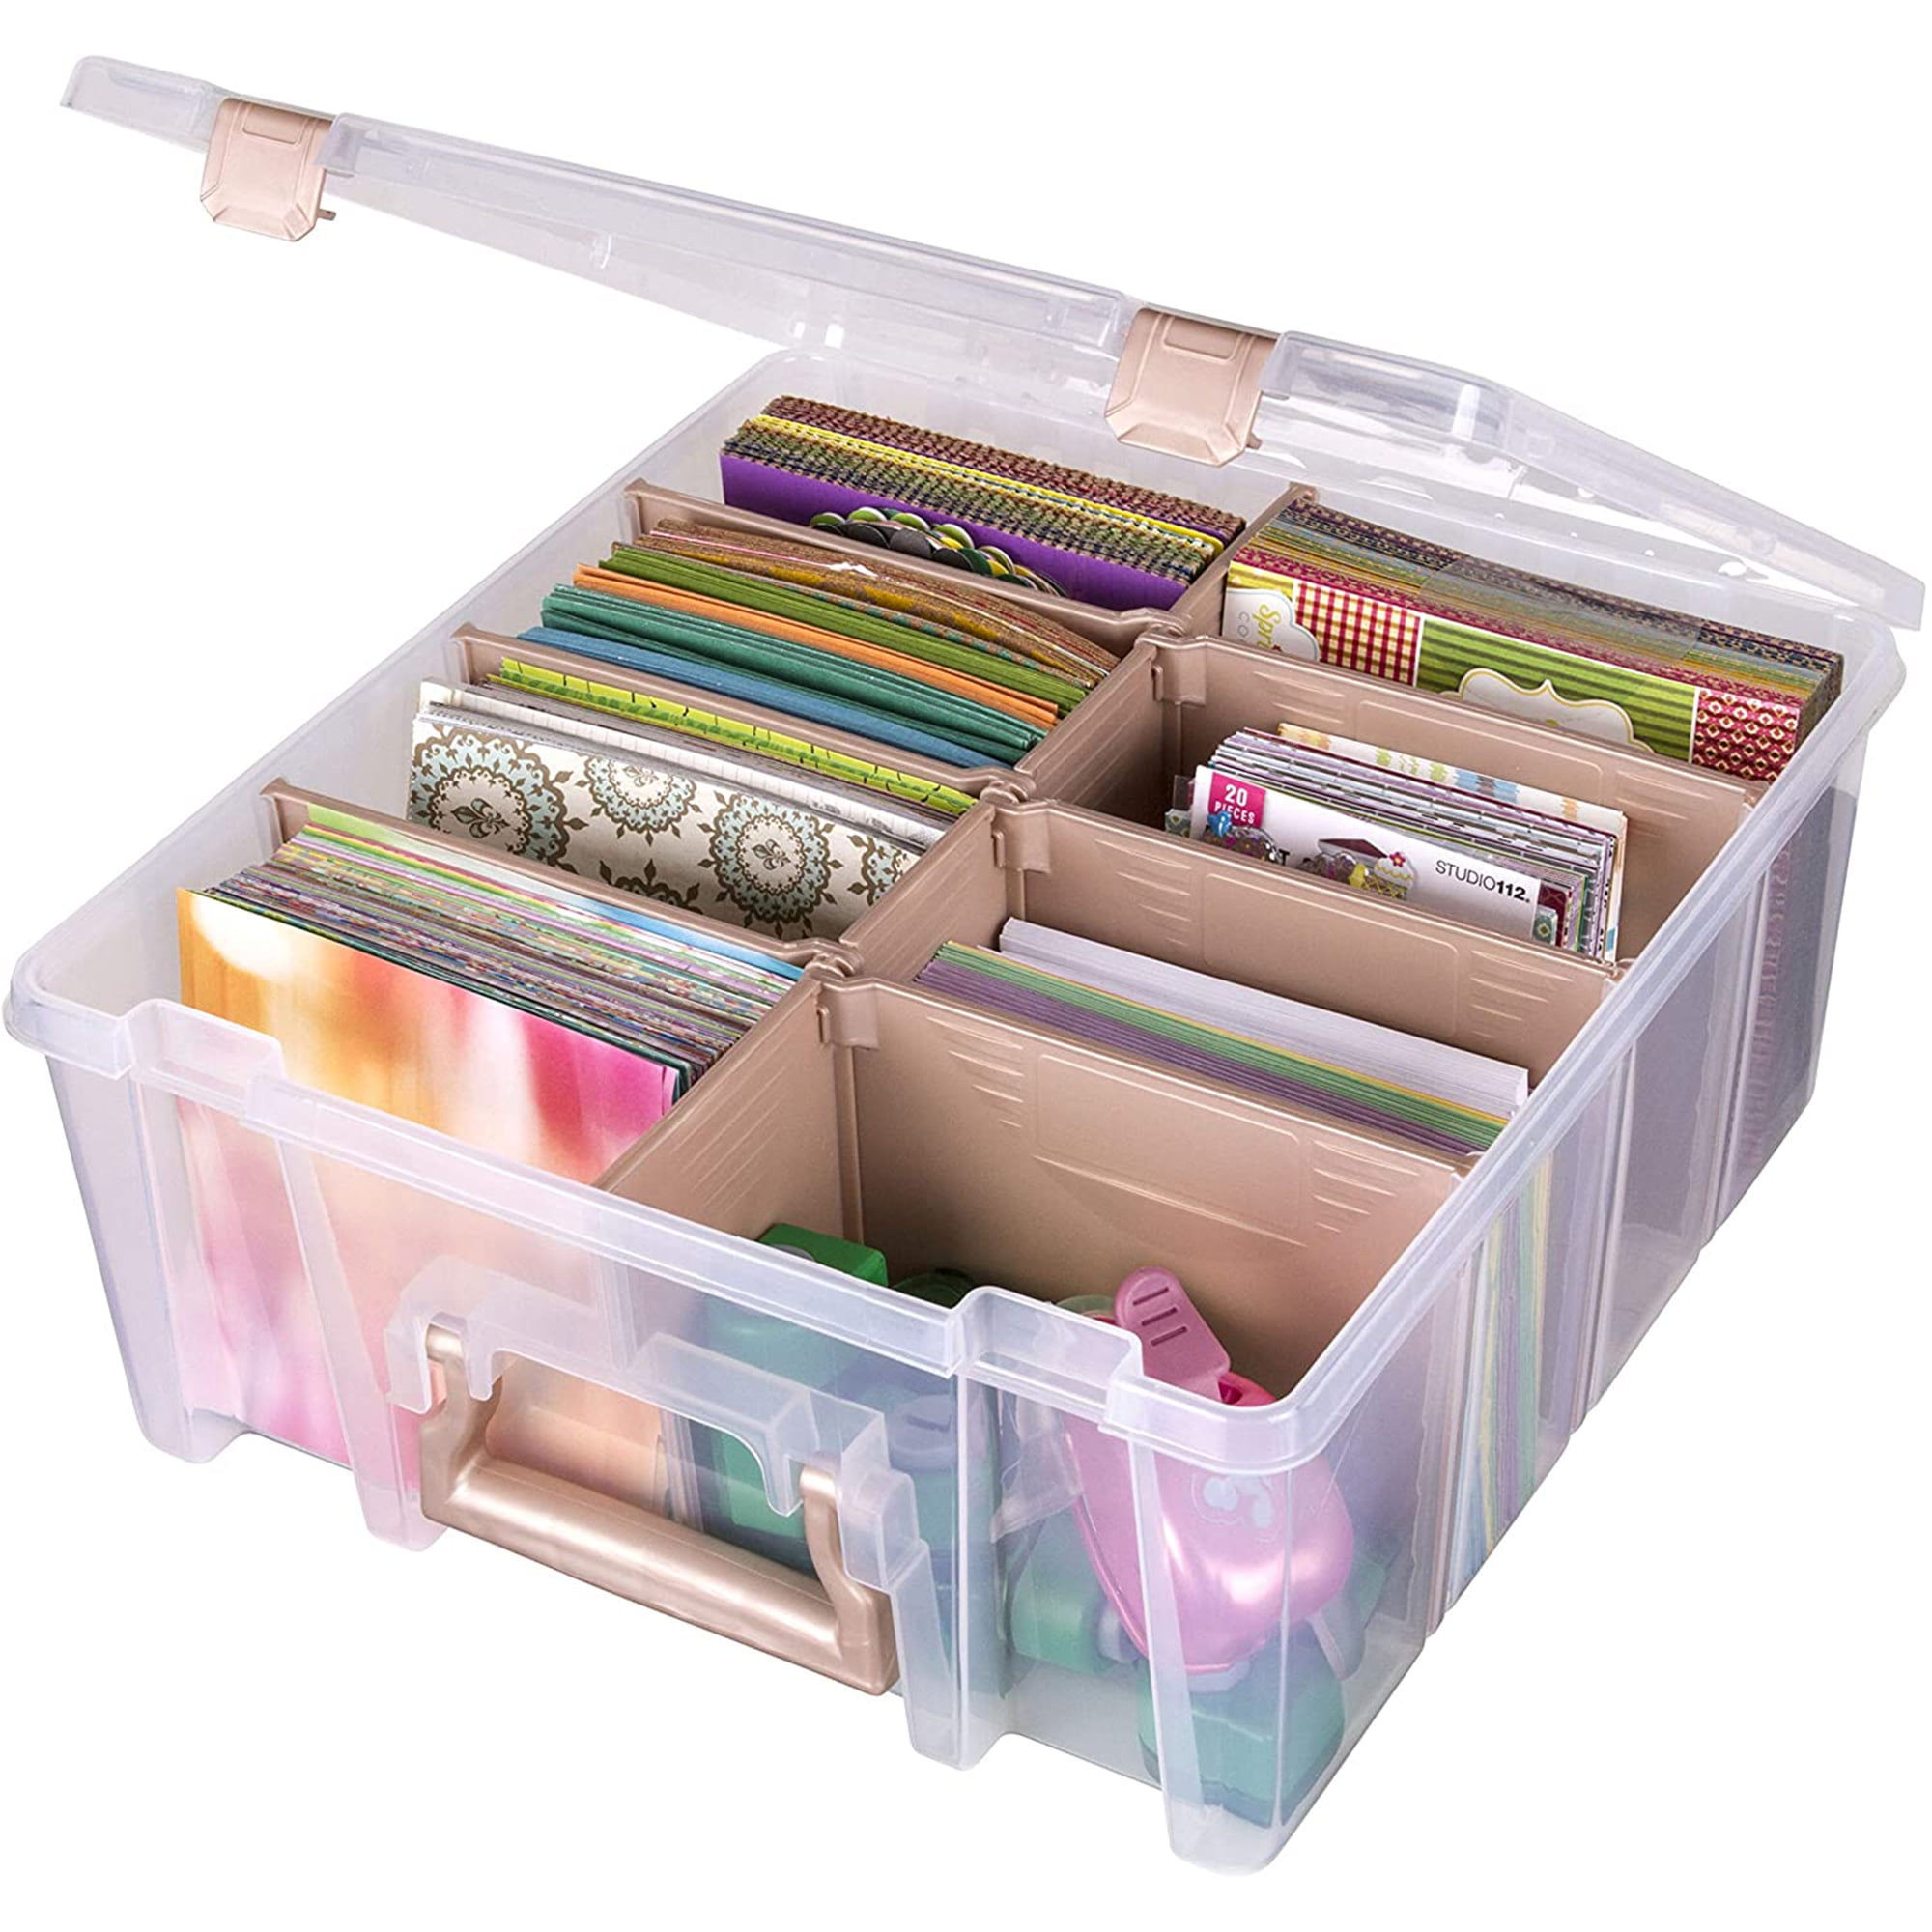 ArtBin Super Satchel Double Deep, Portable Plastic Art and Craft Organizer  with Handle, Clear 